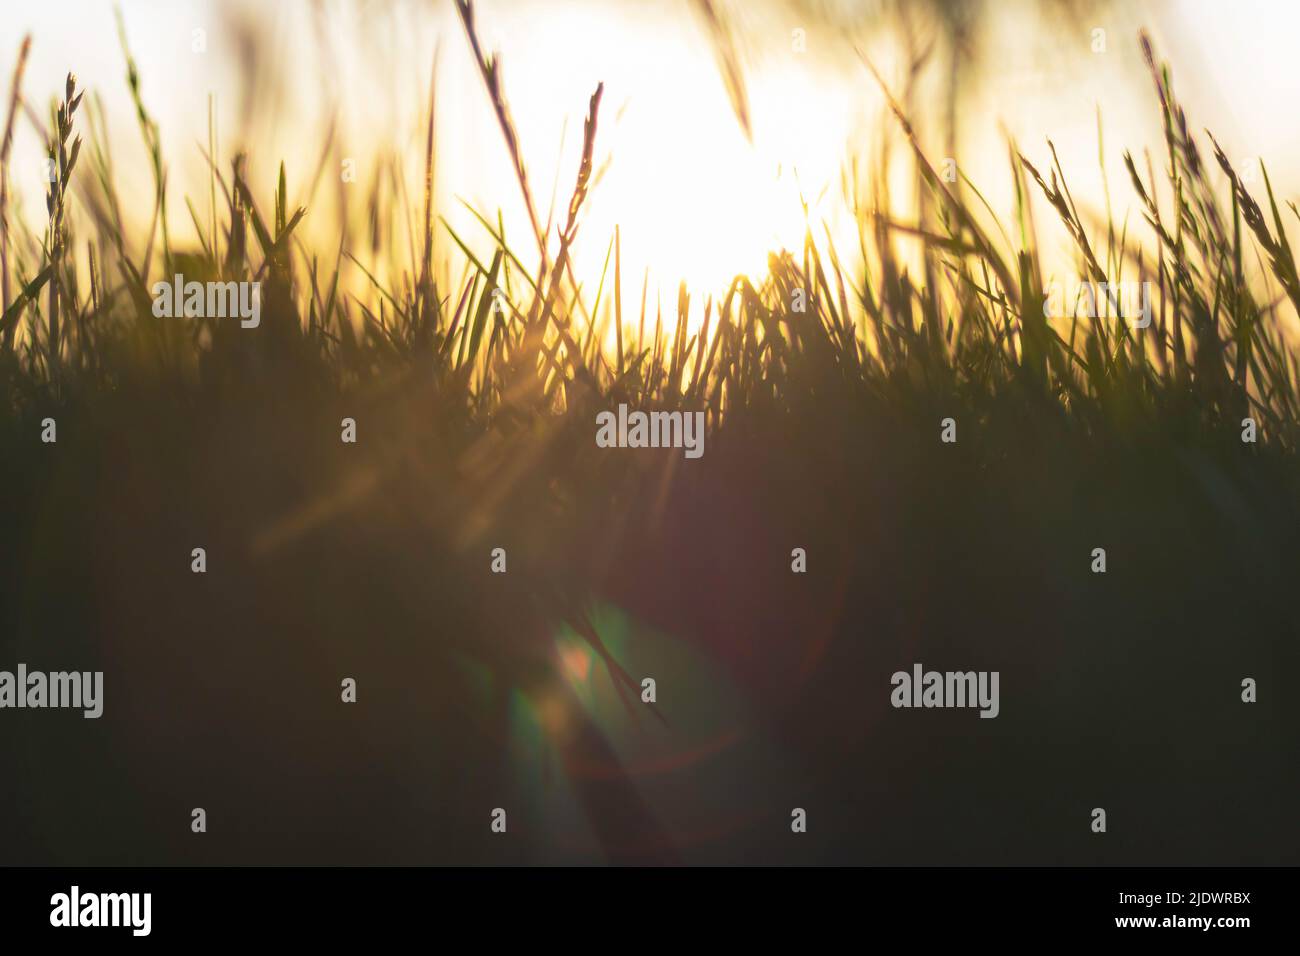 Defocused grasses and direct sunlight at sunset. Nature or environment background. Lens flares and selective focus. Stock Photo